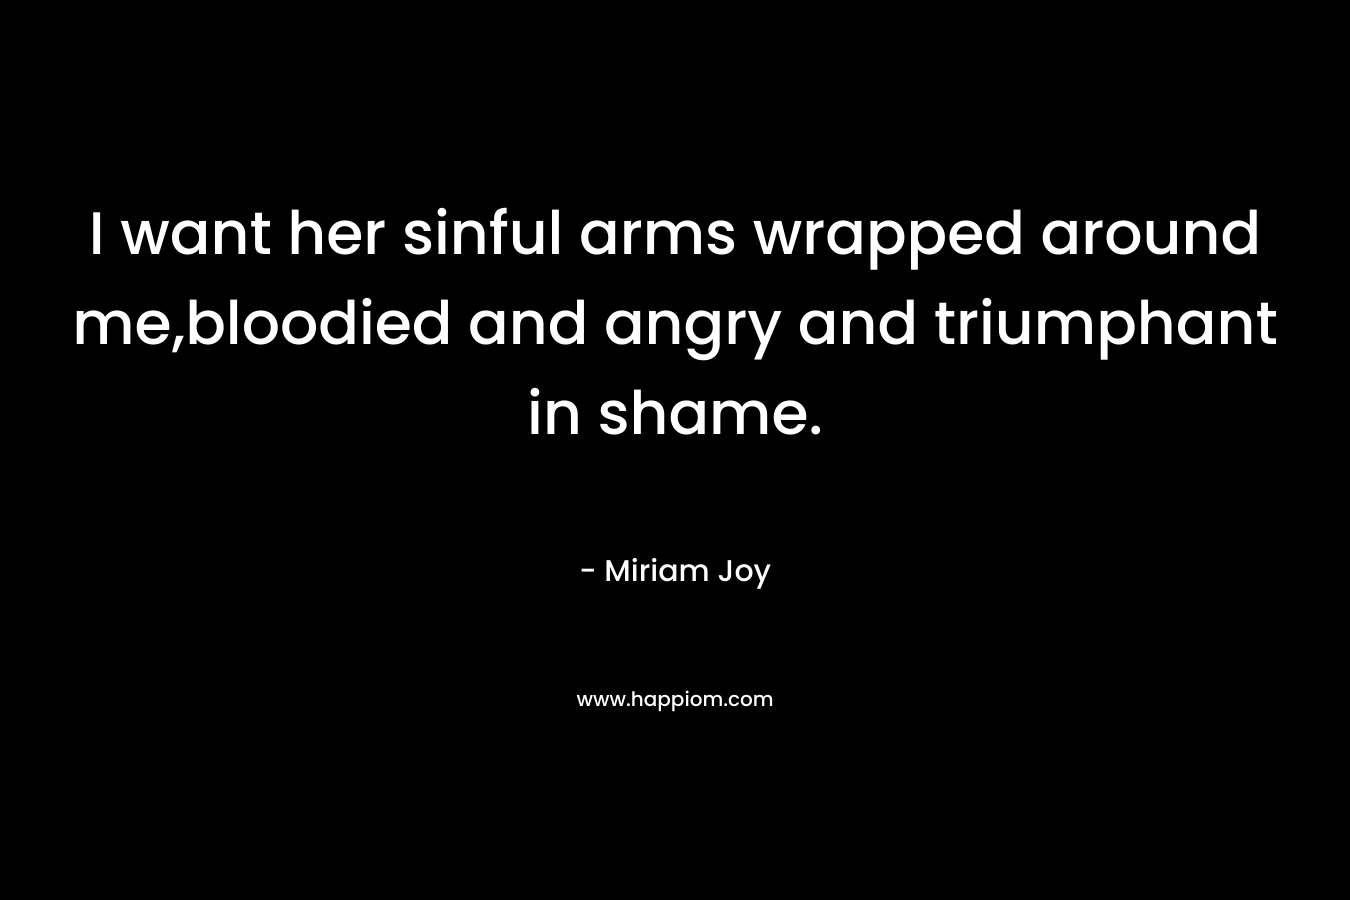 I want her sinful arms wrapped around me,bloodied and angry and triumphant in shame.